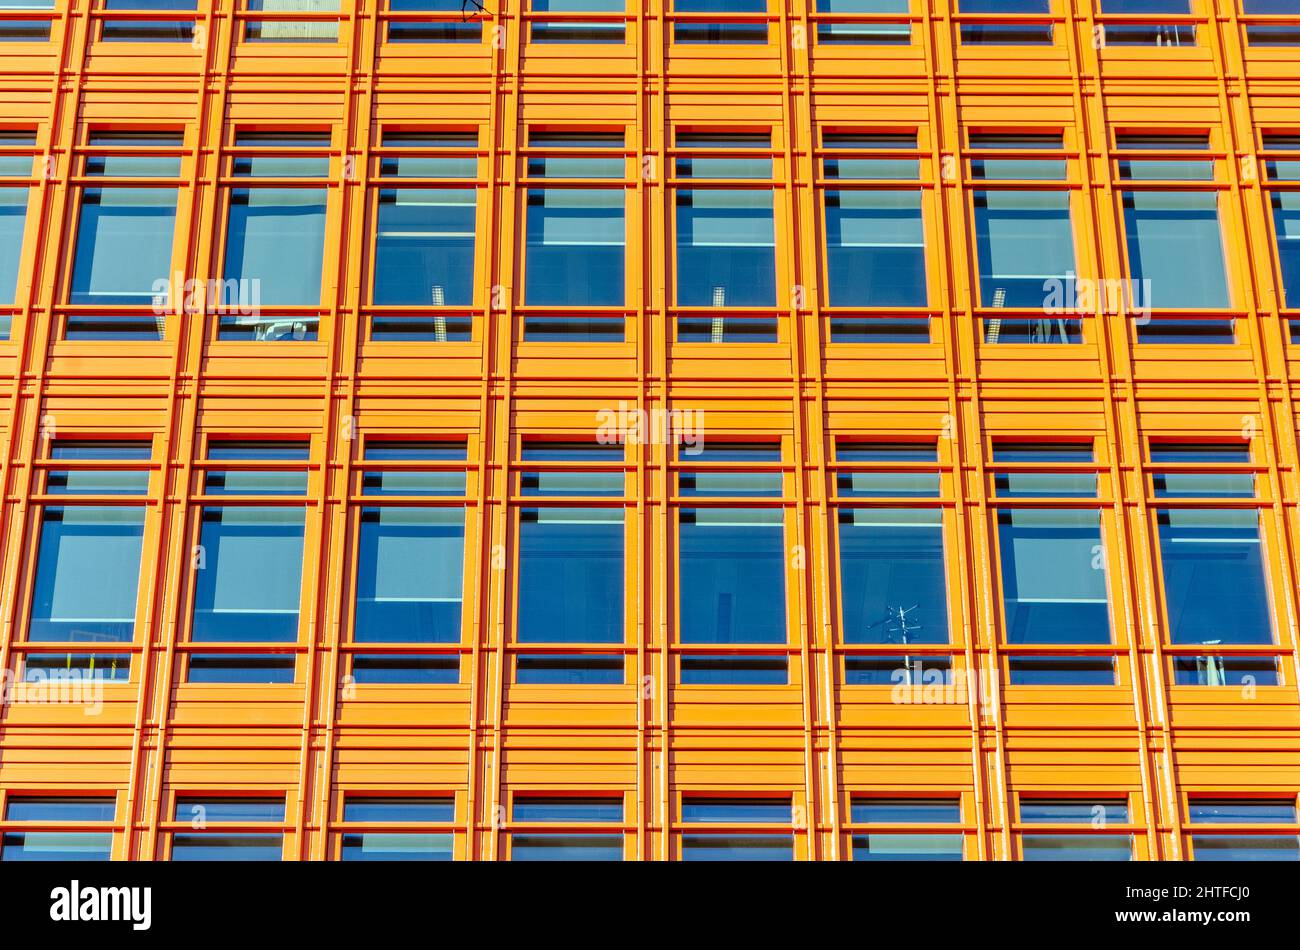 Close up view of windows in a modern, contemporary office block. Windows are in regular, uniform geometric rows and columns Stock Photo